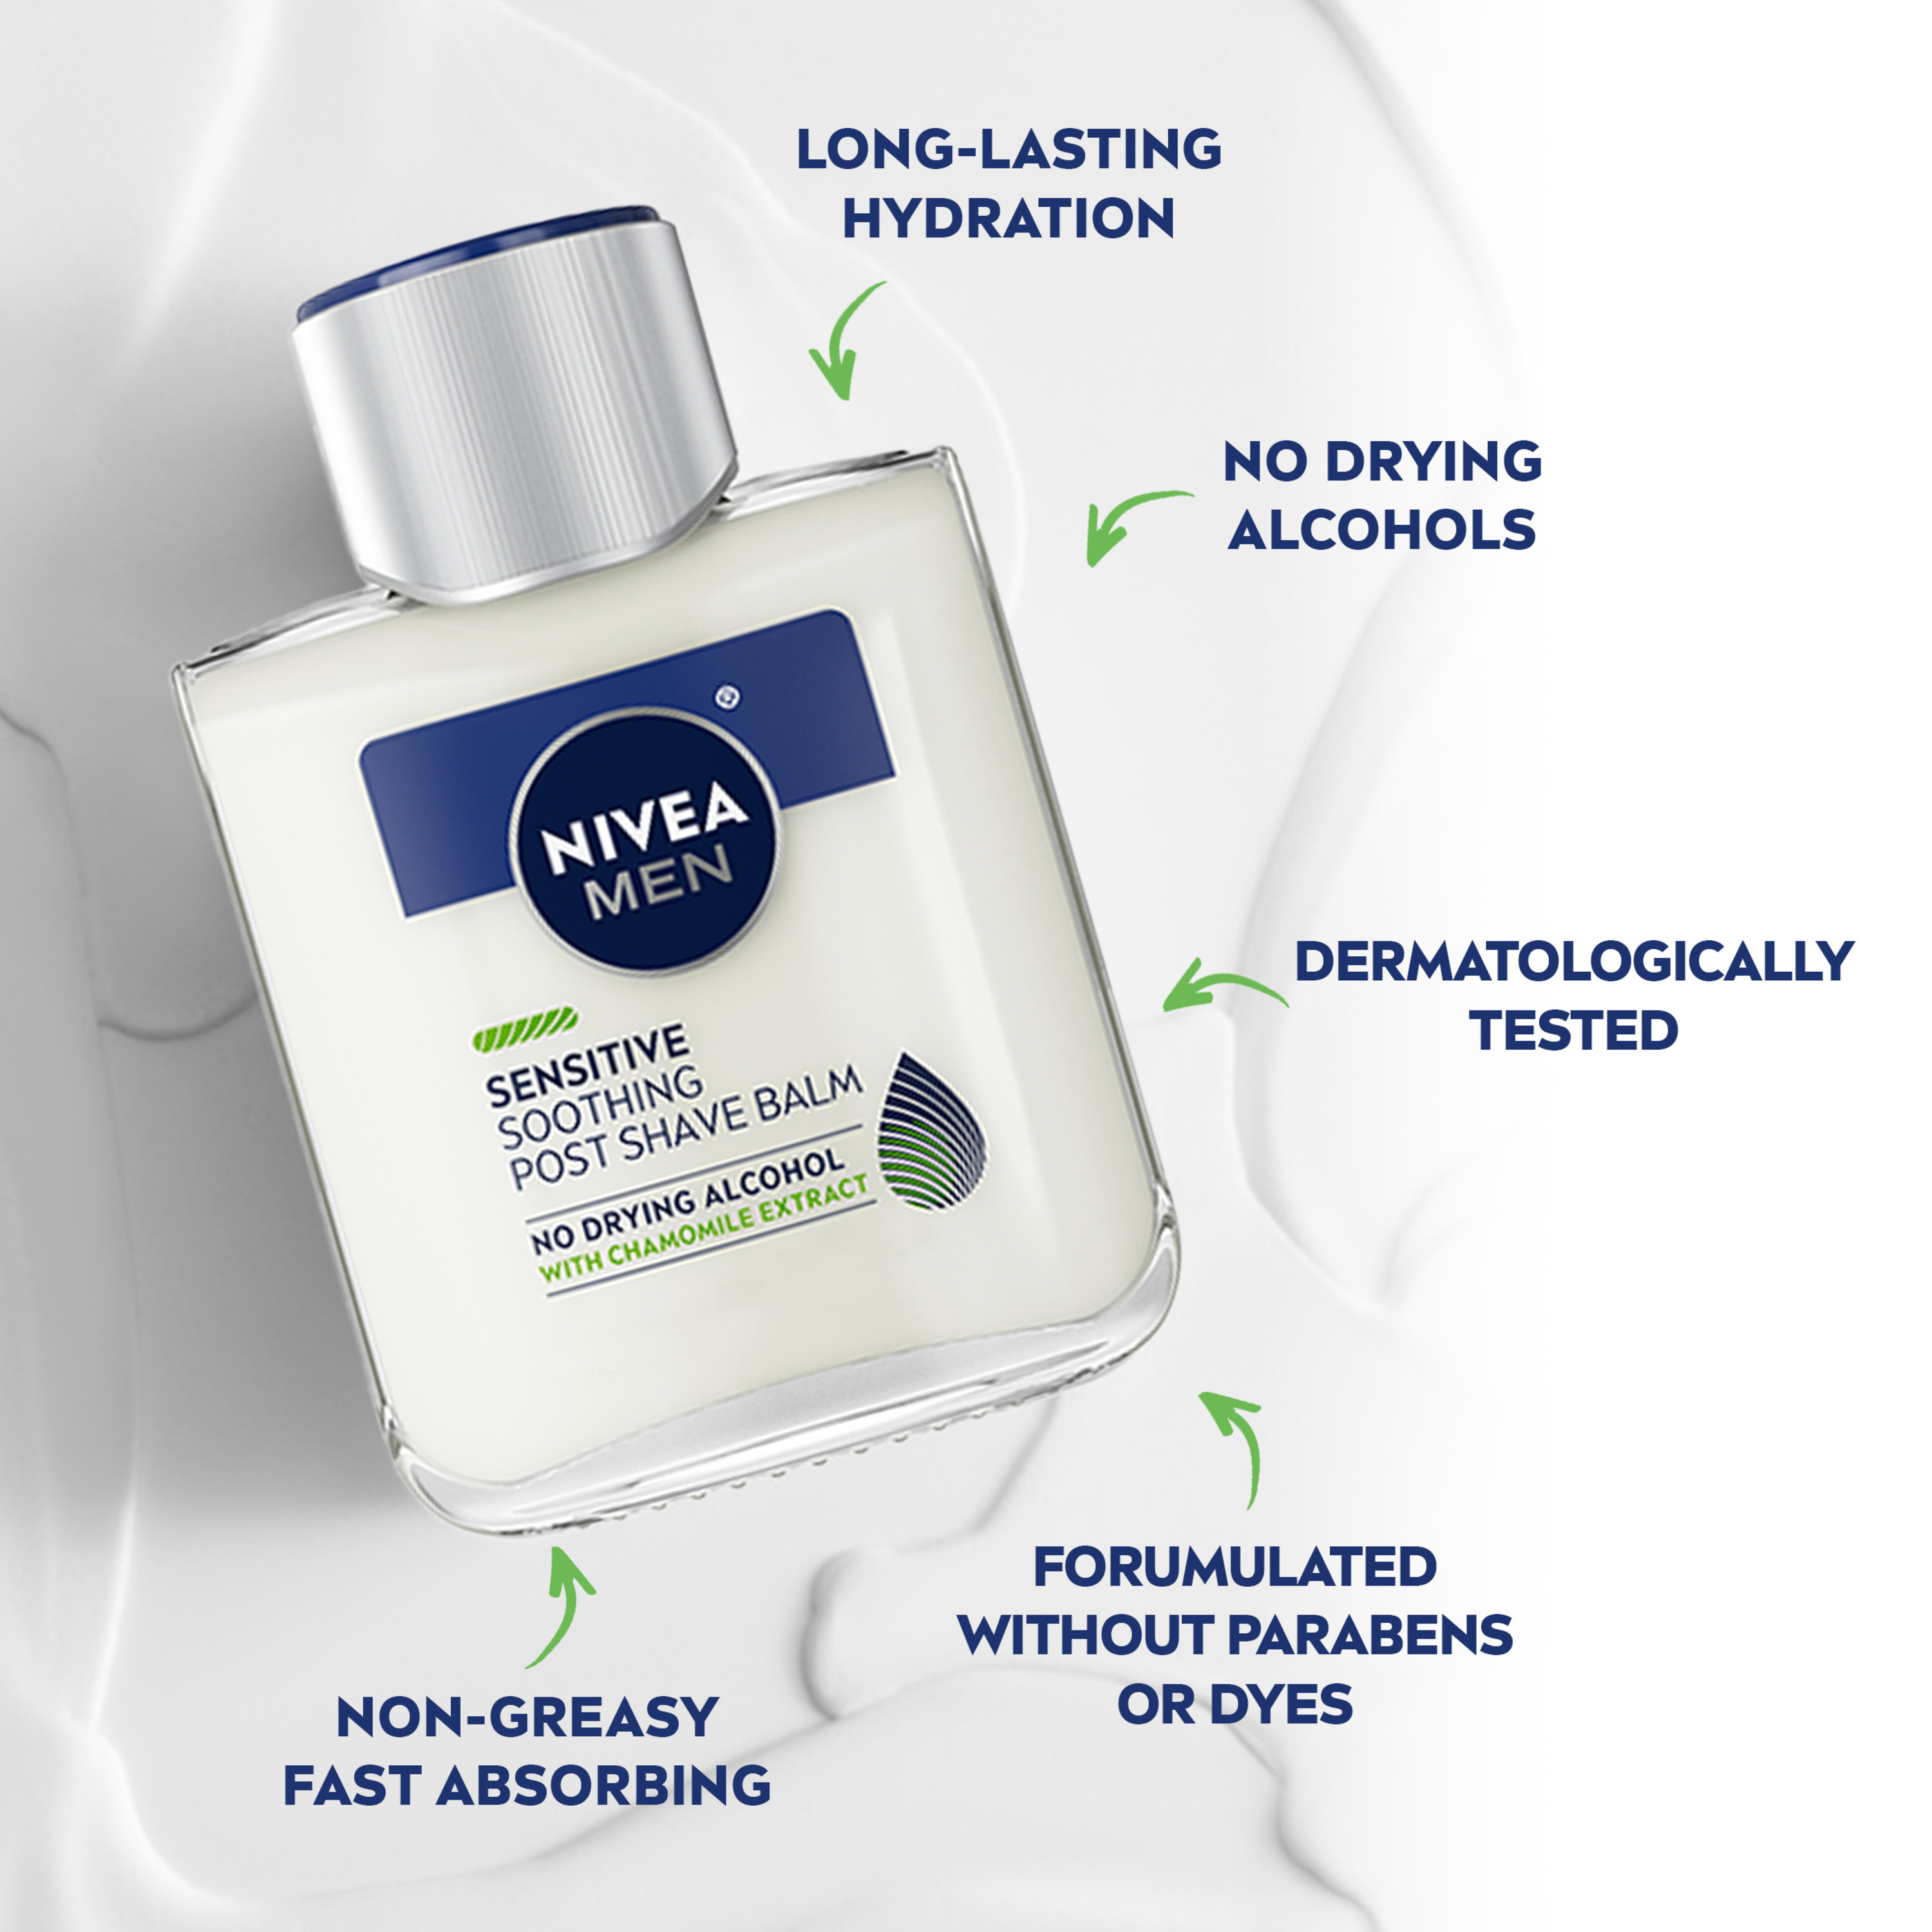 NIVEA MEN Sensitive Post Shave Balm with Vitamin E, Chamomile and Witch Hazel Extracts, 3.3 Fl Oz Bottle - image 5 of 15